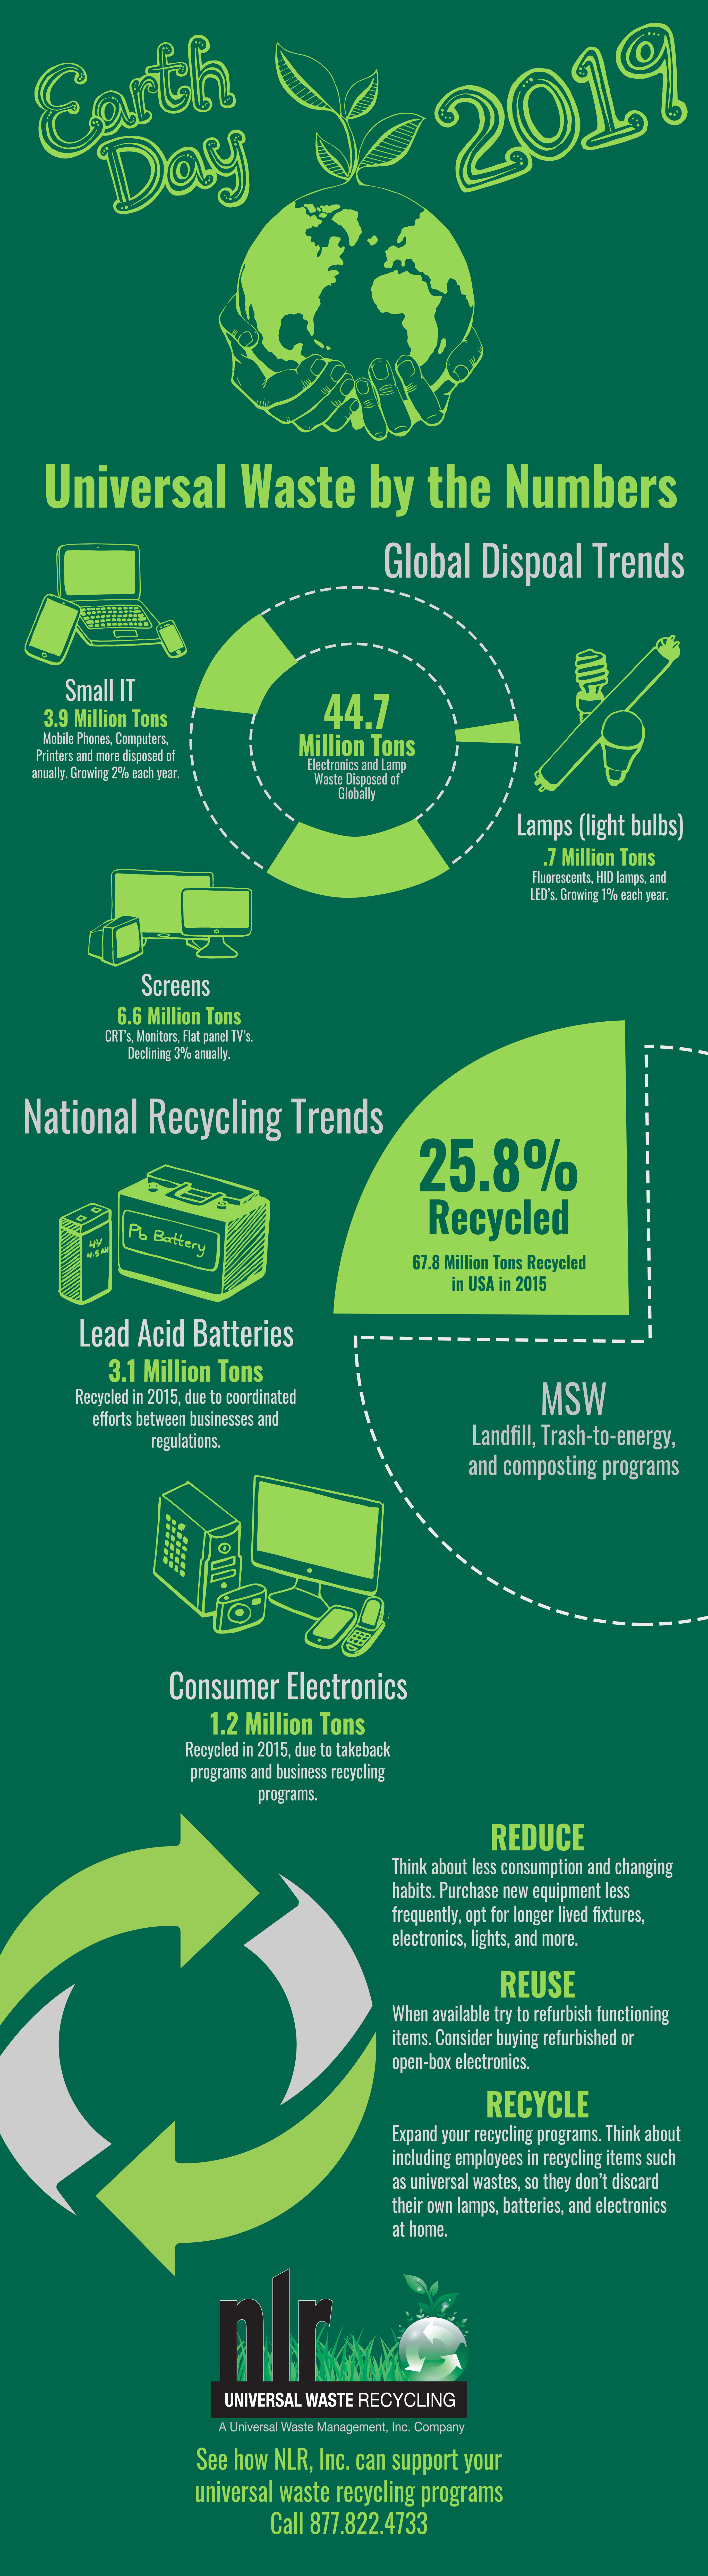 Infographic about some universal waste trends both globally and in the United States.